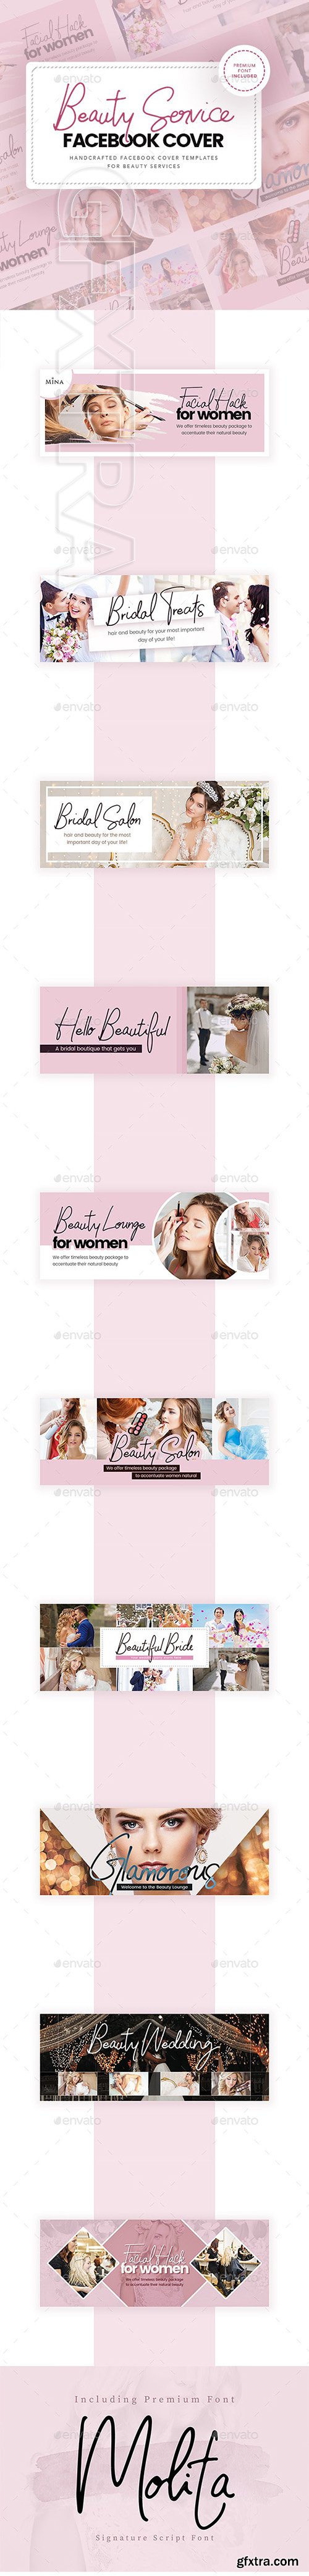 GraphicRiver - Beauty Service Facebook Cover 24742912